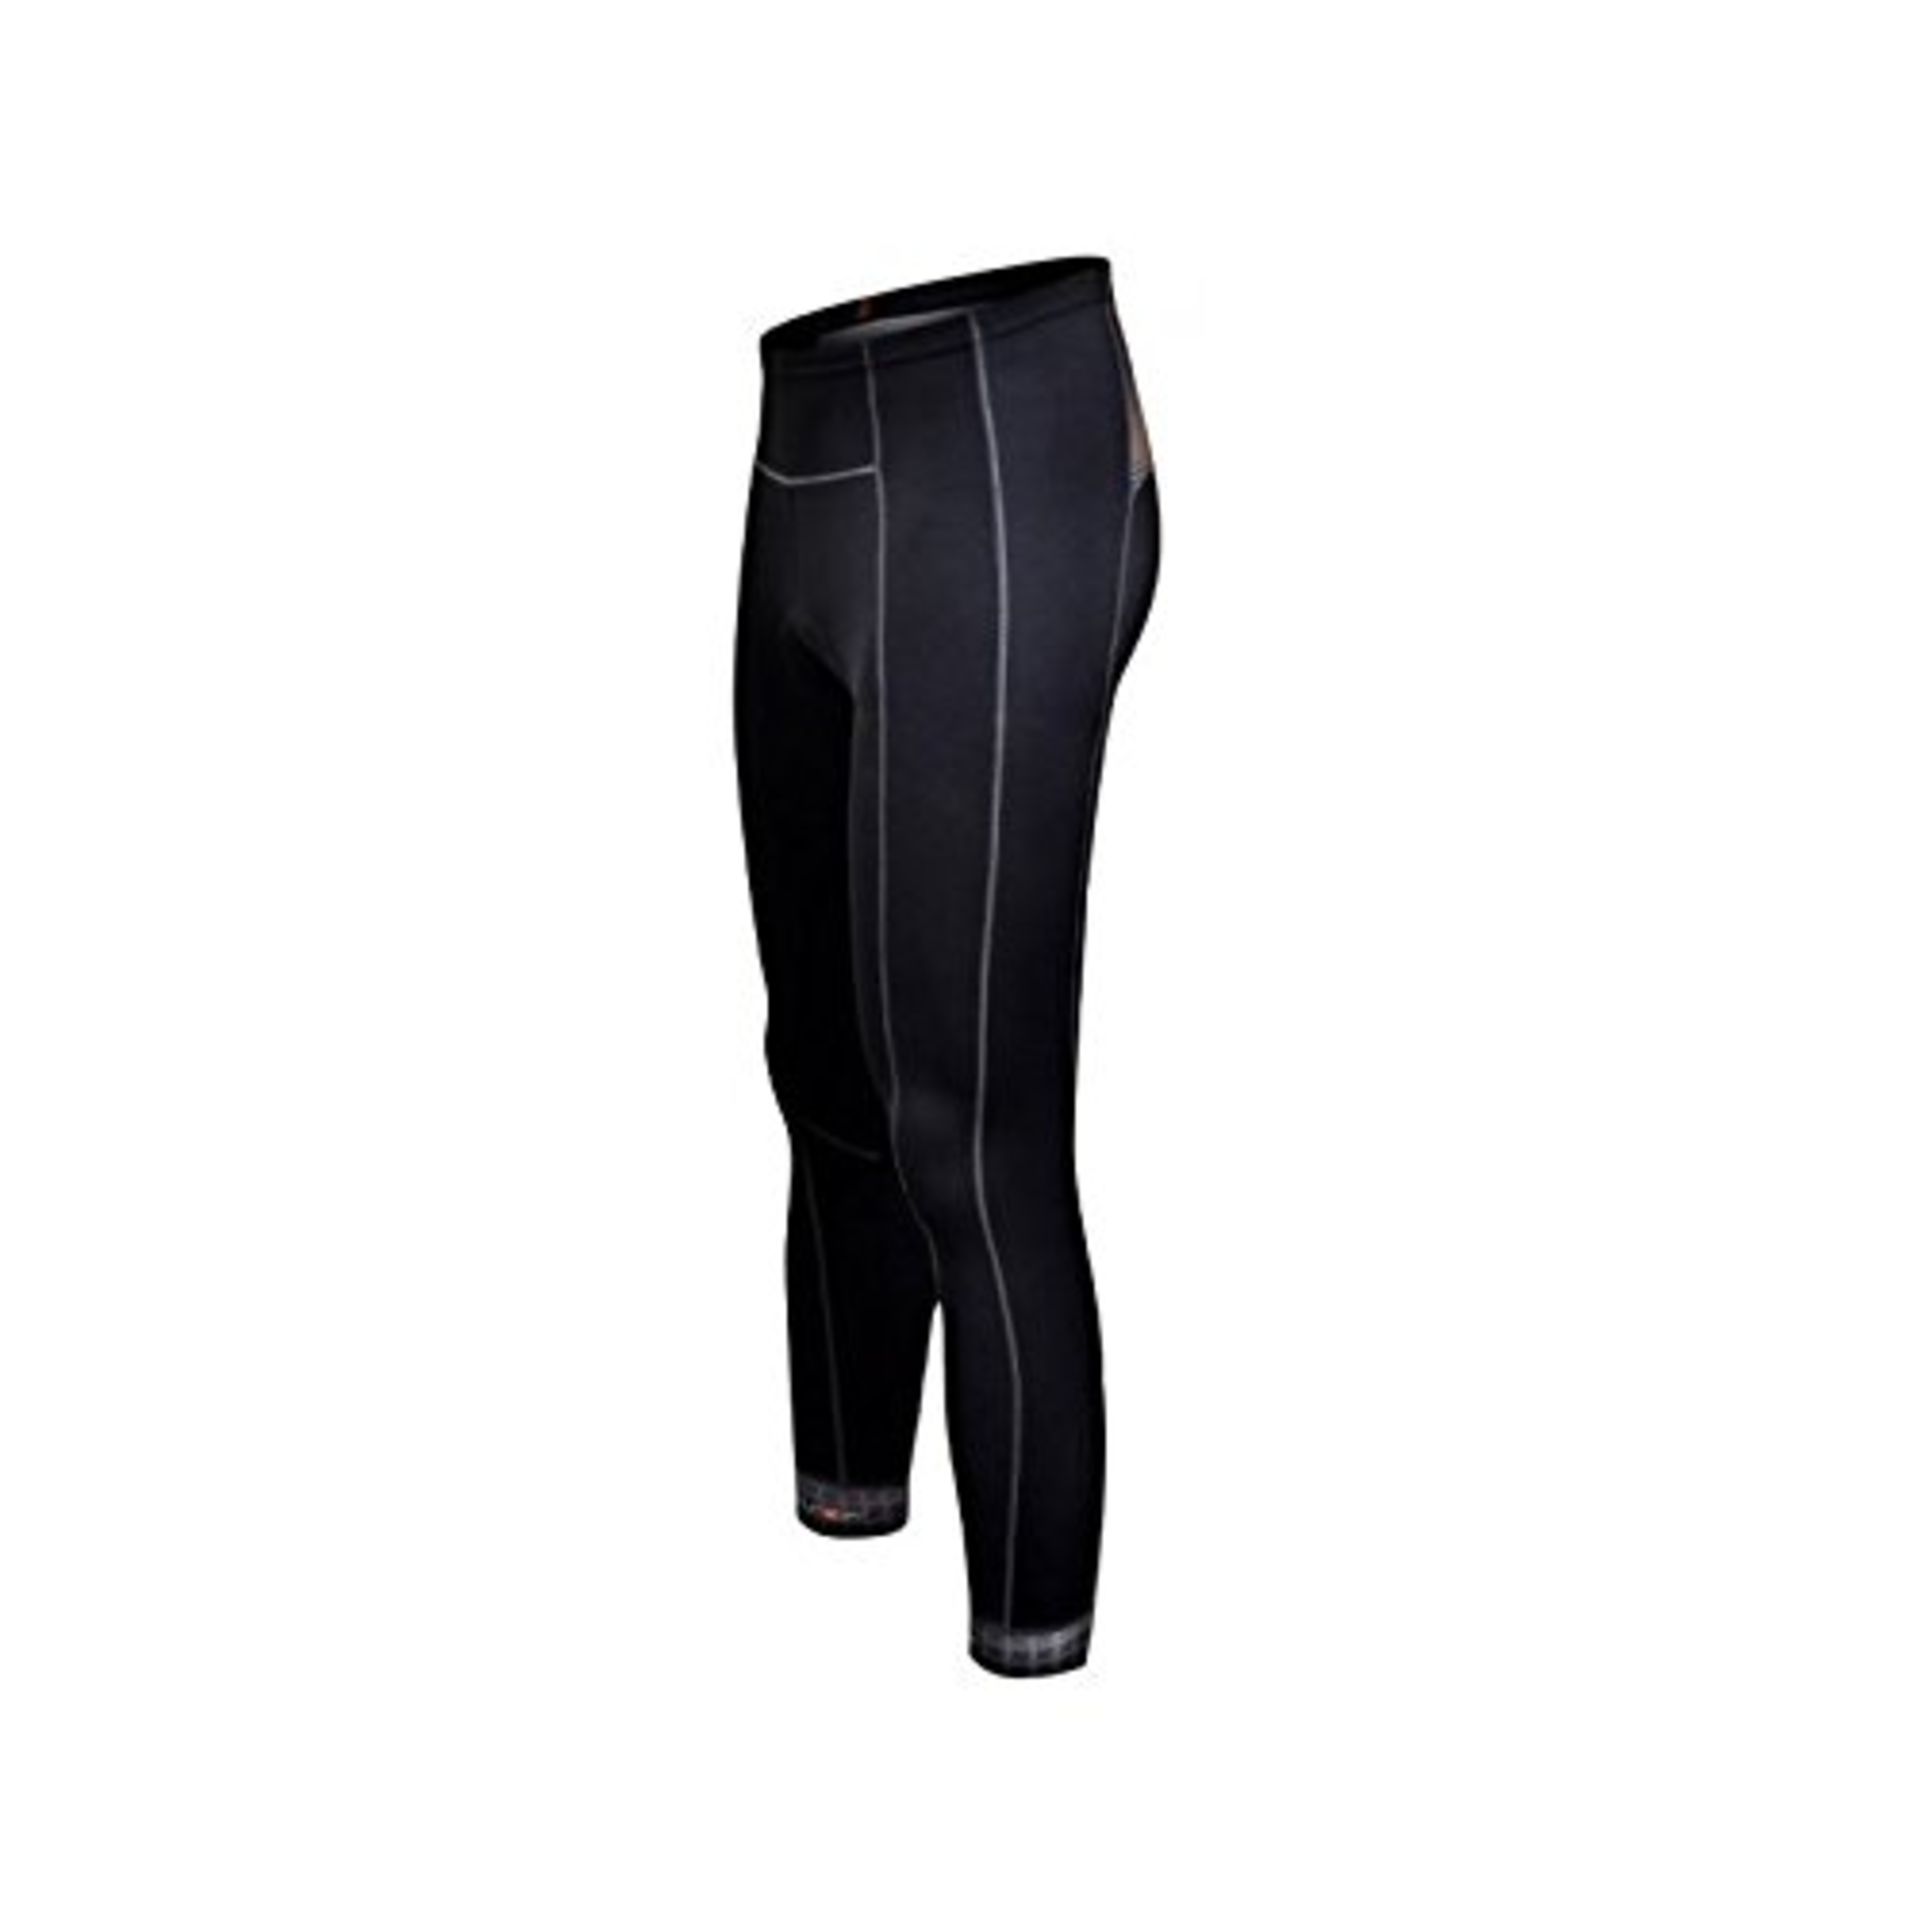 3 x Pairs of Women's Microfleece Thermal Tights | Total RRP £92.62 | See Description for Details - Image 3 of 3